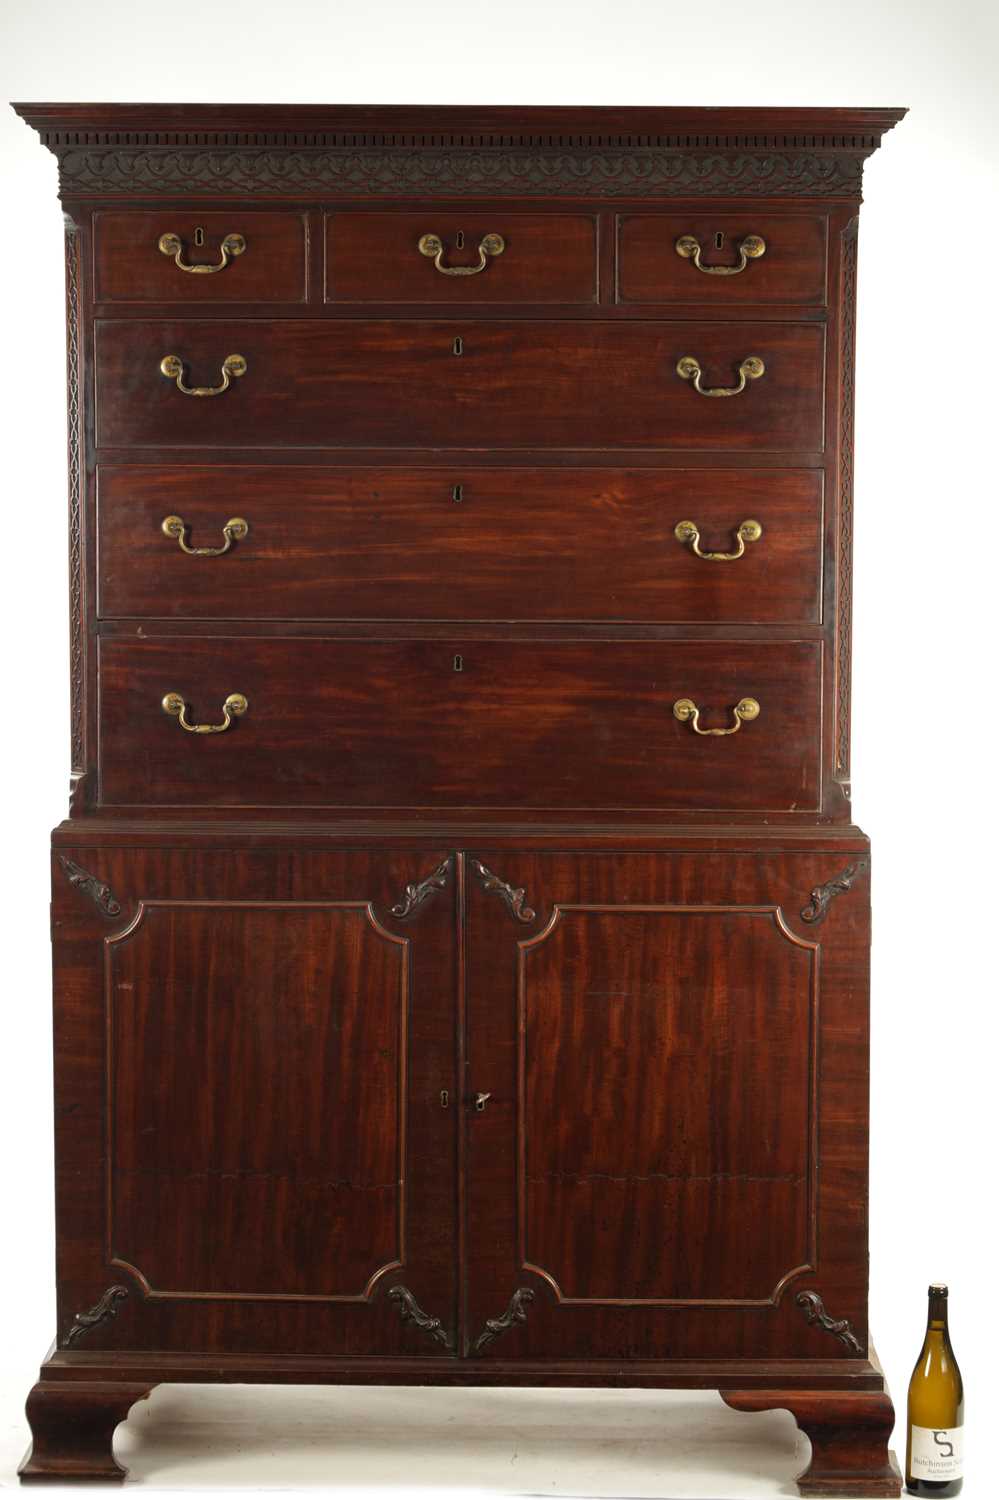 A FINE GEORGE III CHIPPENDALE DESIGN MAHOGANY SECRETAIRE CHEST ON CABINET FROM THE LILFORD ESTATE - Image 2 of 8